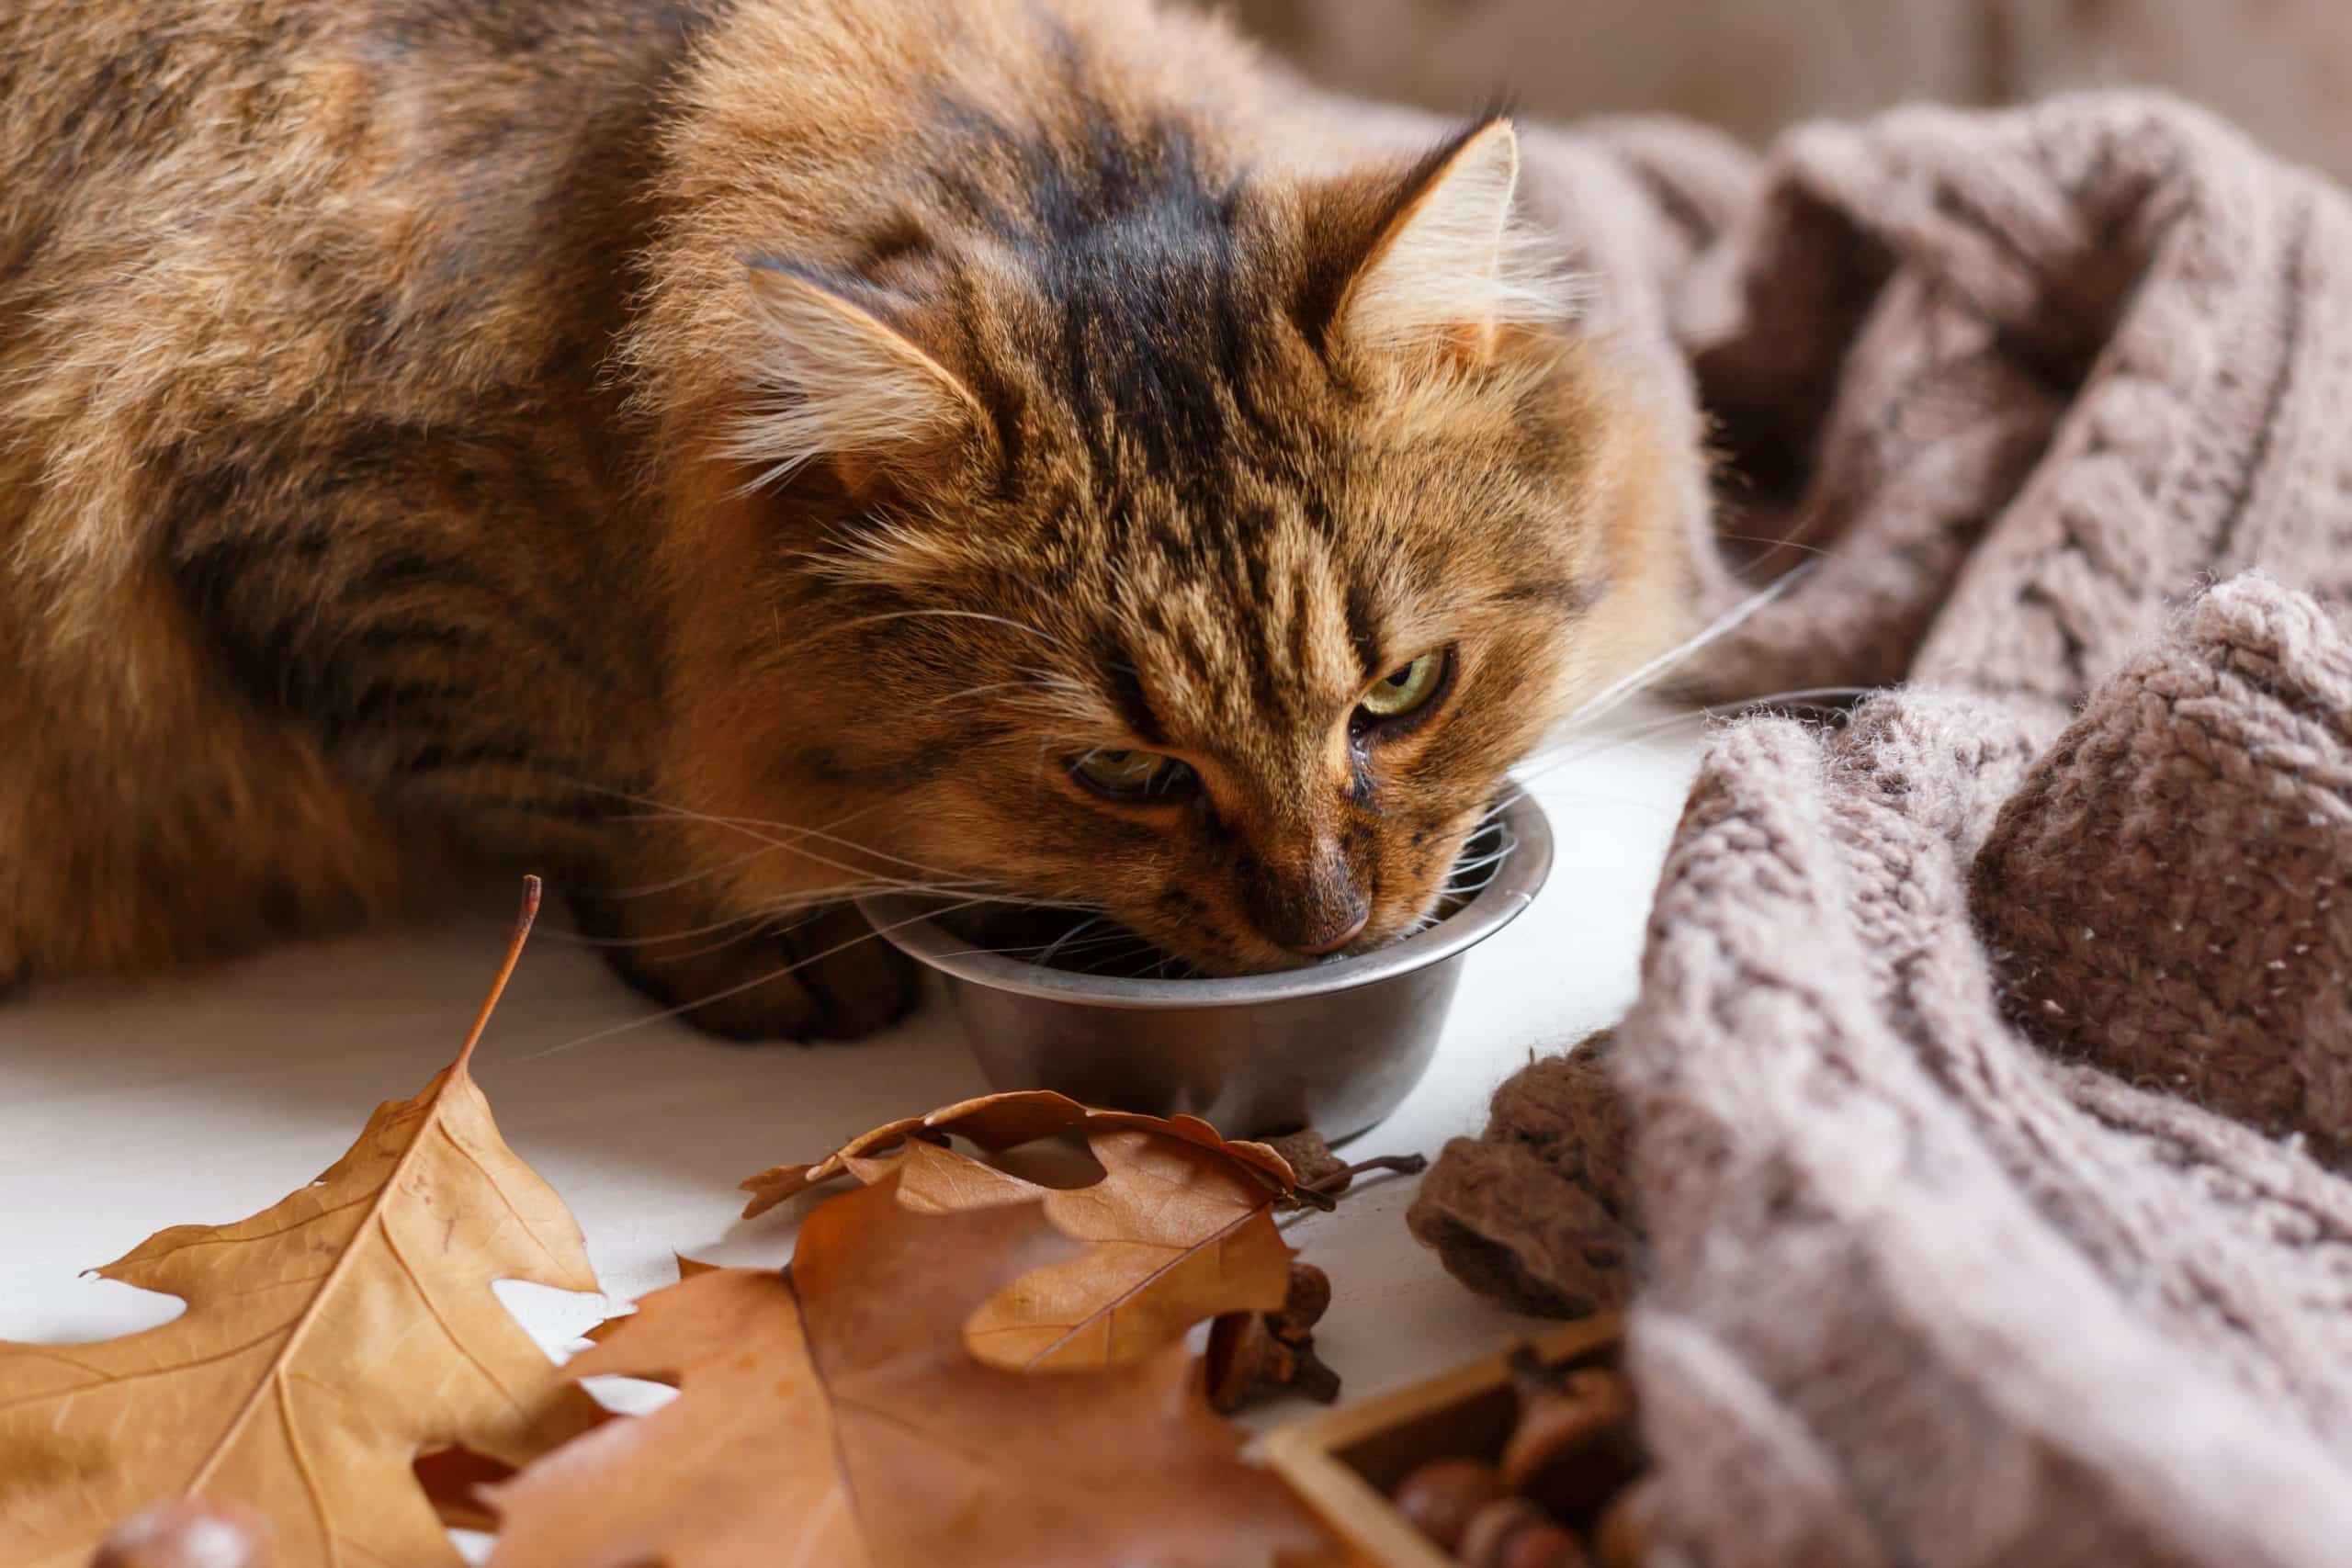 A cat drinking from a bowl of autumn leaves while being mindful of pet safety in summer.